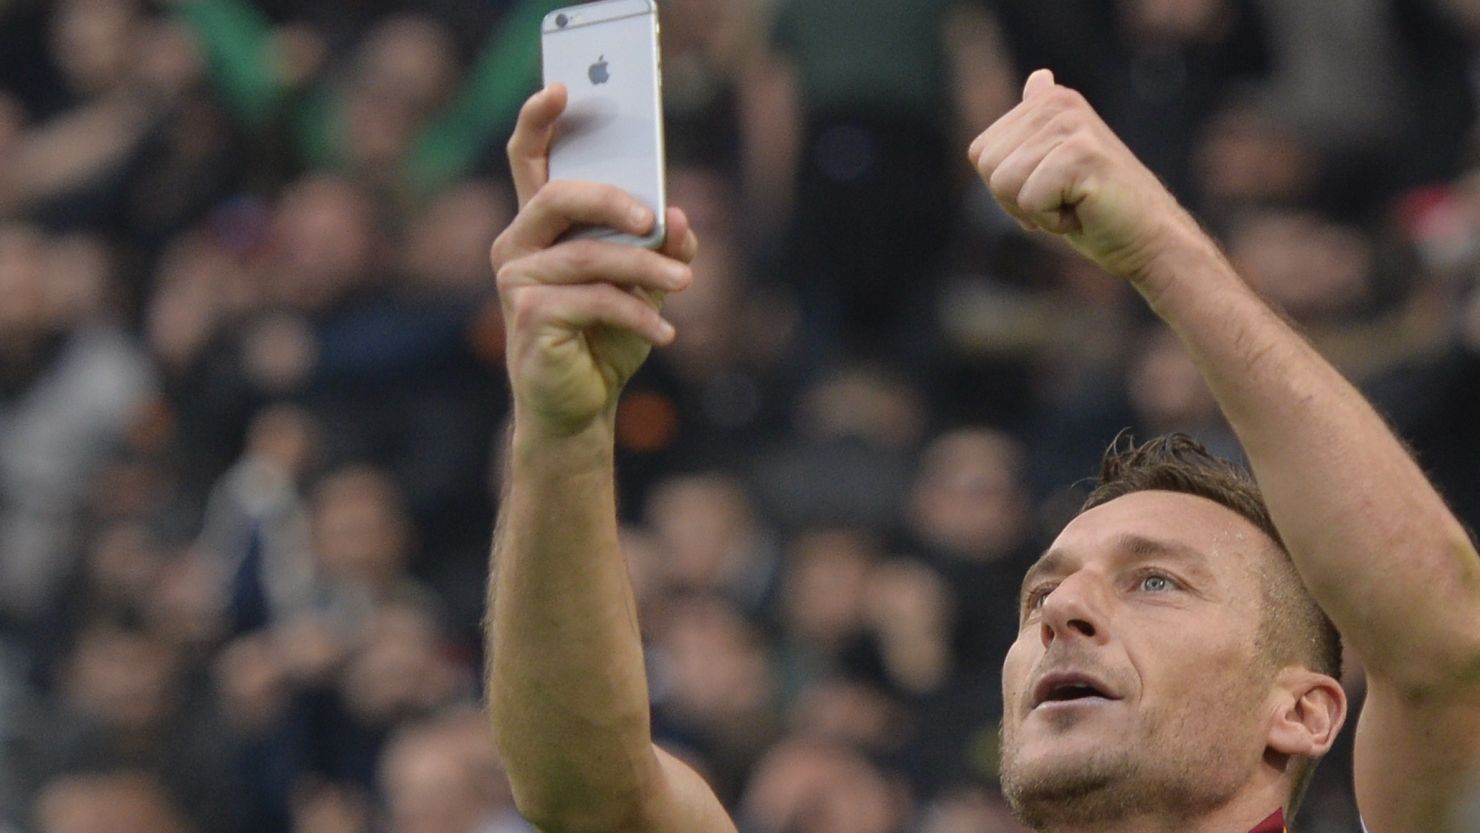 Francesco Totti takes a 'selfie' after scoring his second and the equalizer against Lazio in the Olympic Stadium.